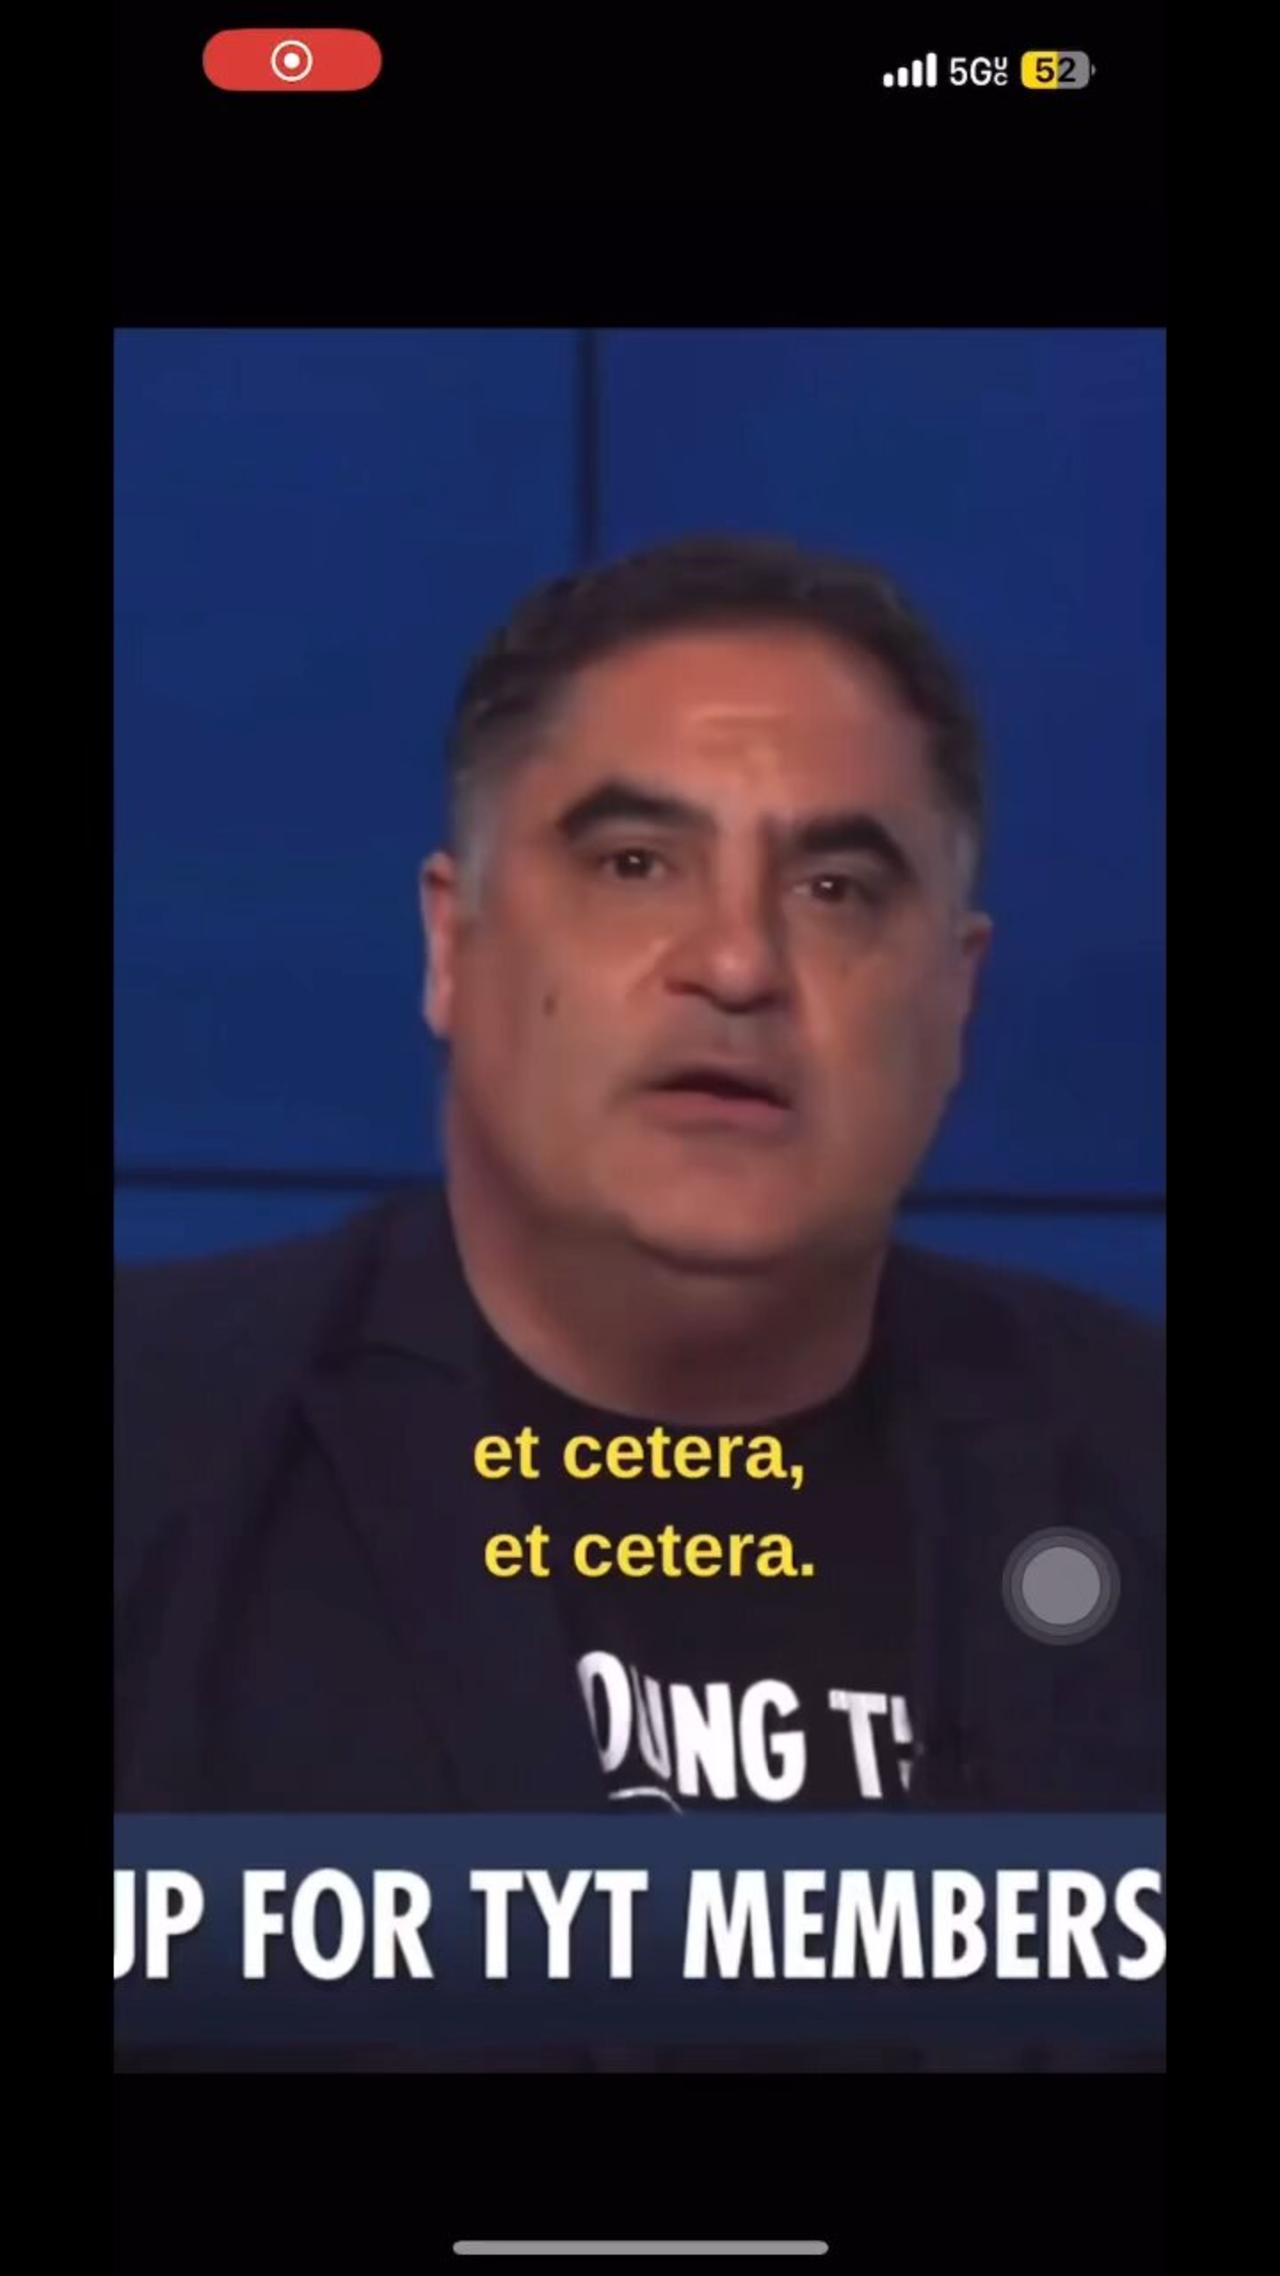 Cenk Uygur passionately supporting Palestine part 2